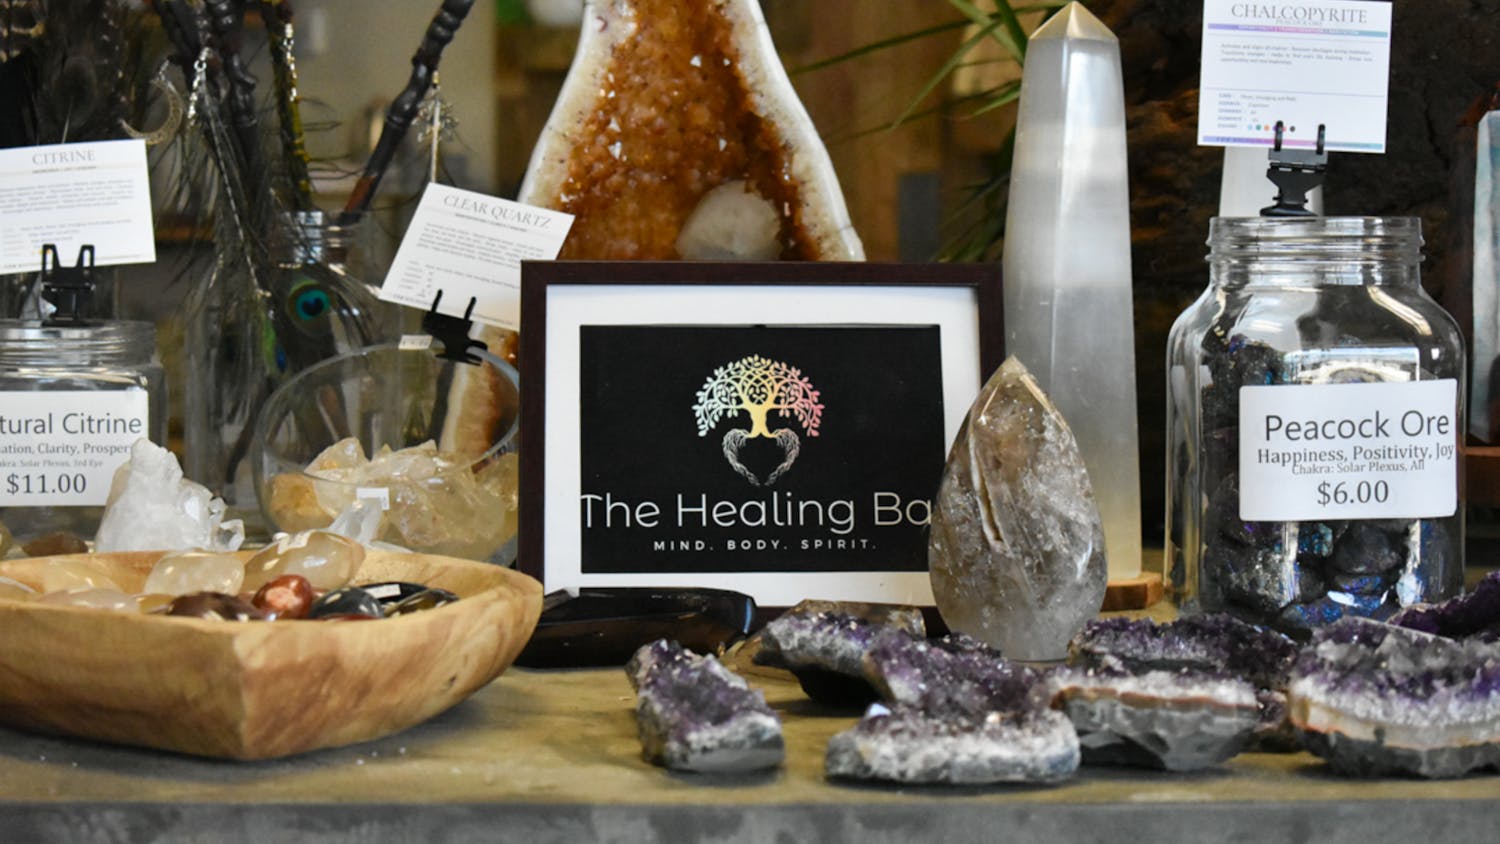 For some members of the Columbia community, crystals have become a new tool to improving mental health. One shop, The Healing Bar, and its owner affirm that crystals and metaphysics serve as an emotional outlet and tool for improving mental health.